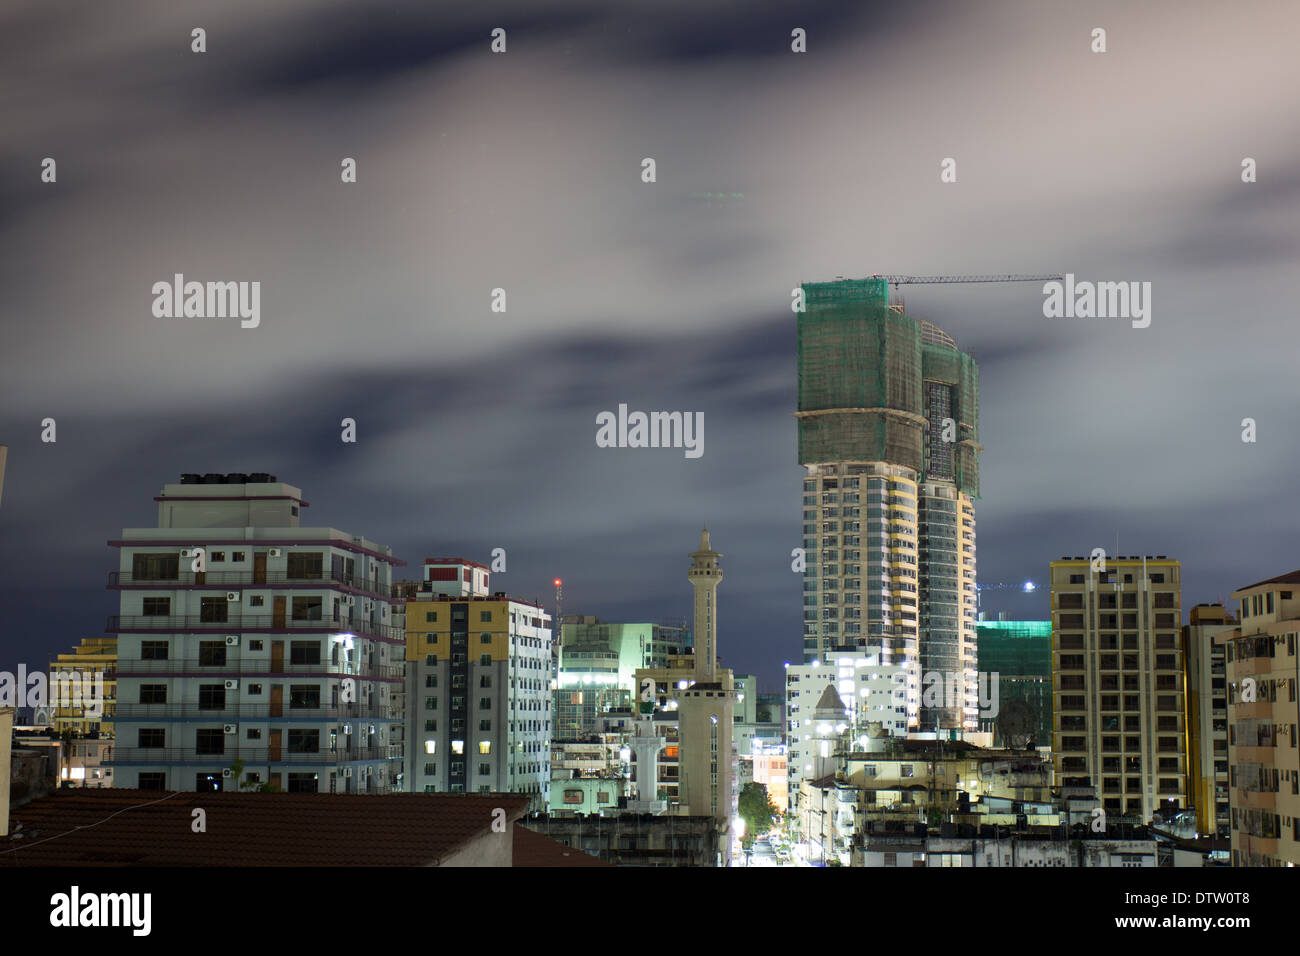 Night view of the downtown area of the city of Dar Es Salaam, Tanzania, at night Stock Photo